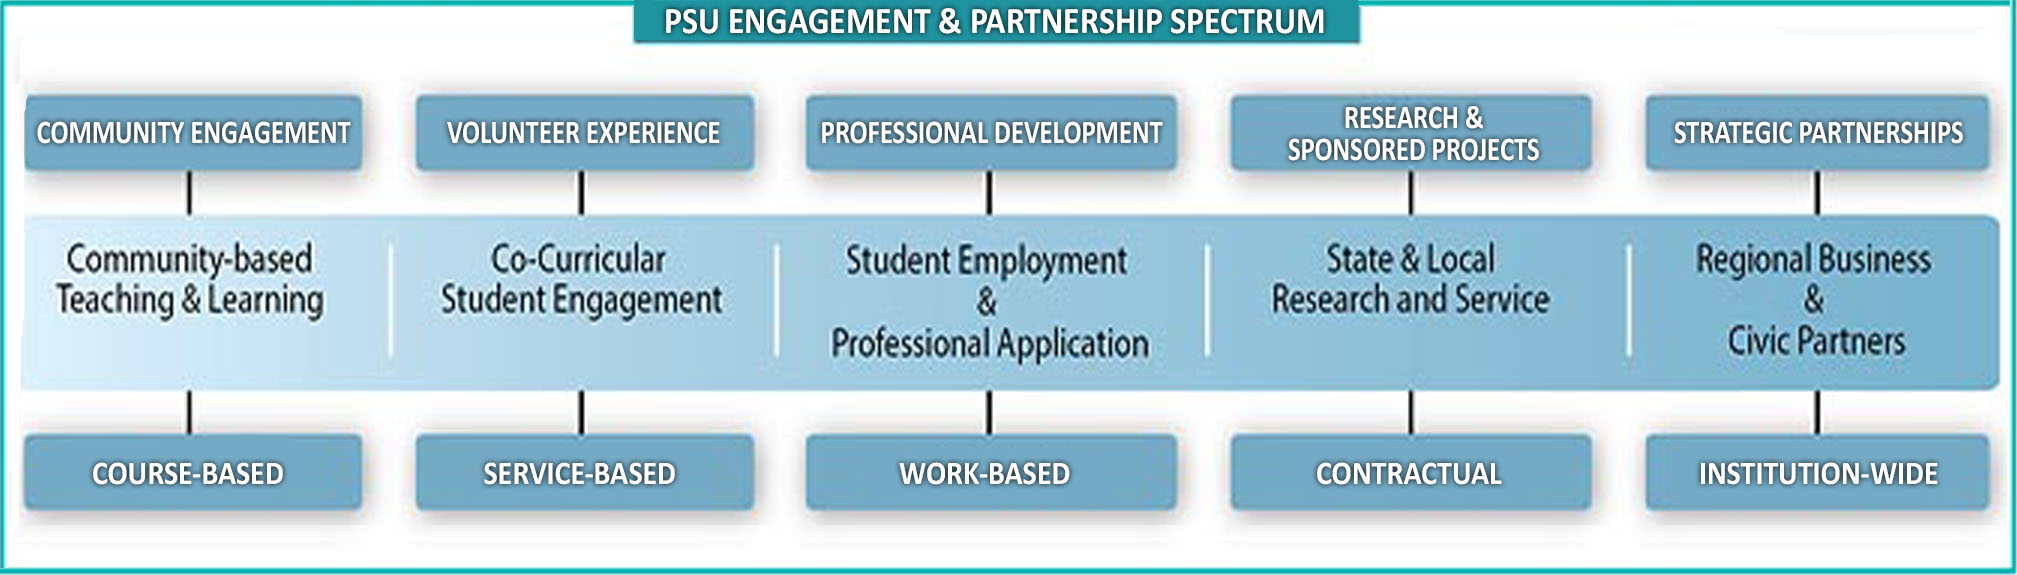 Chart showing the PSU Engagement and Partnerships Spectrum